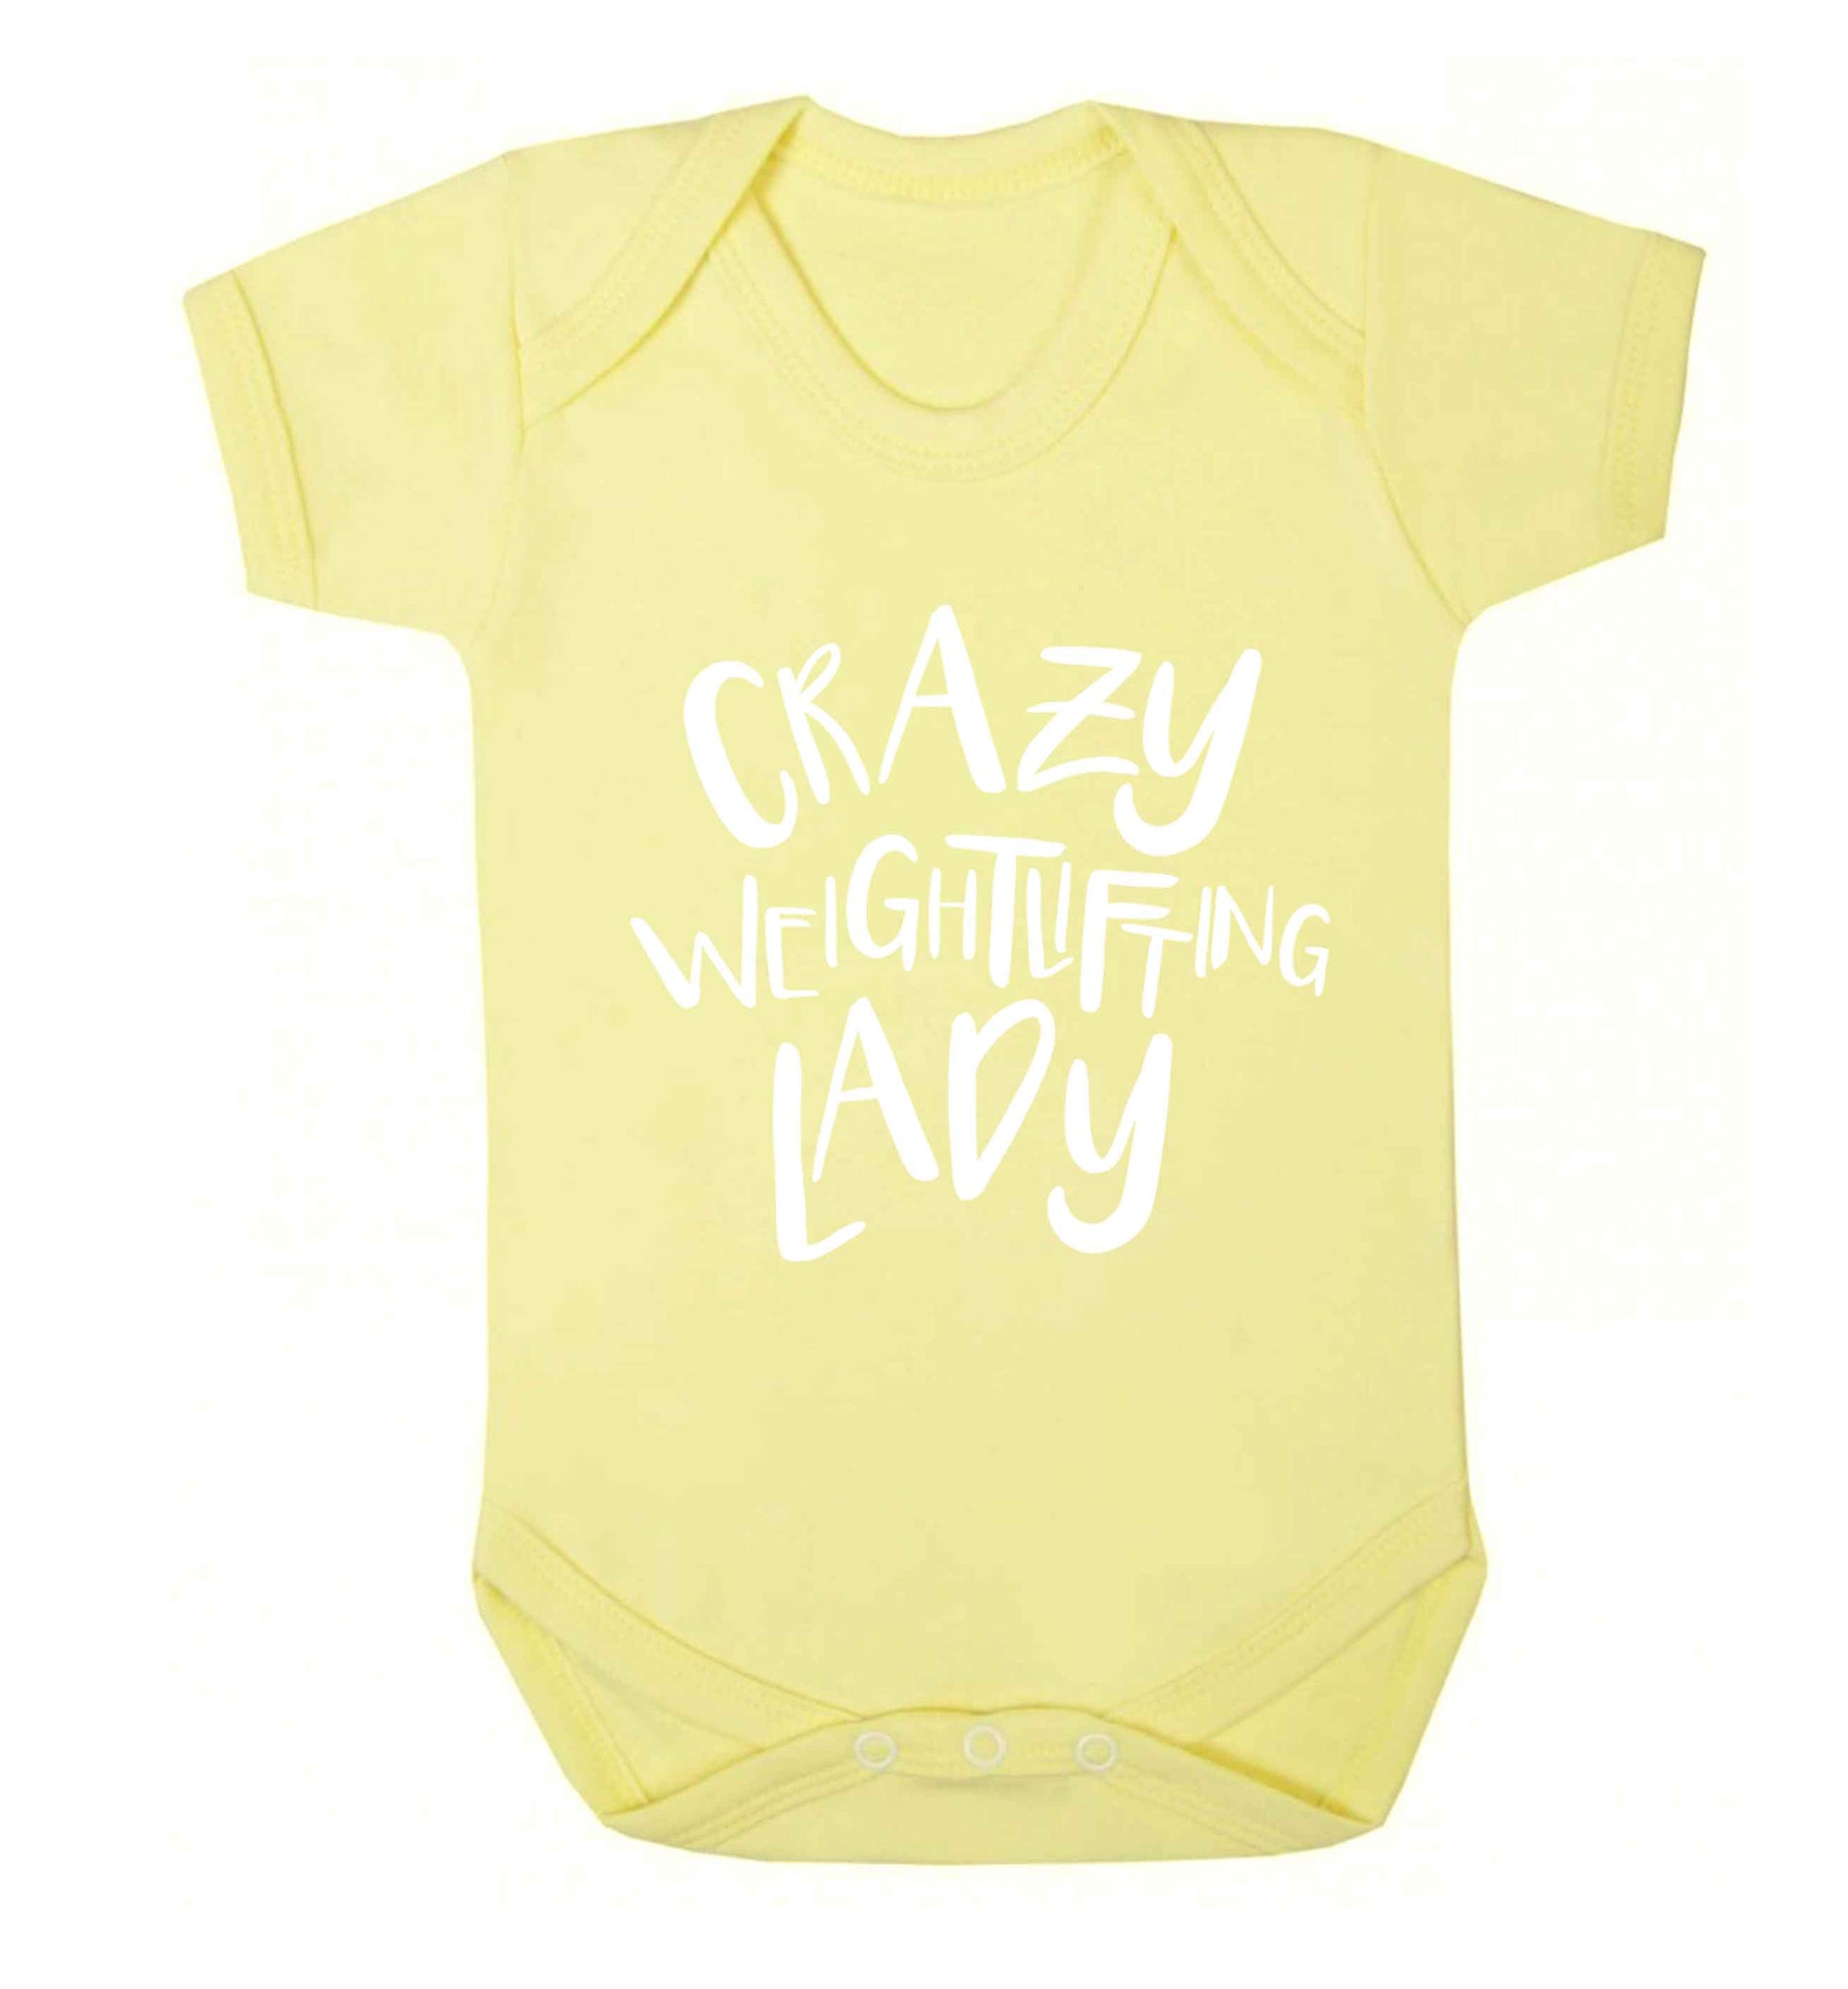 Crazy weightlifting lady Baby Vest pale yellow 18-24 months